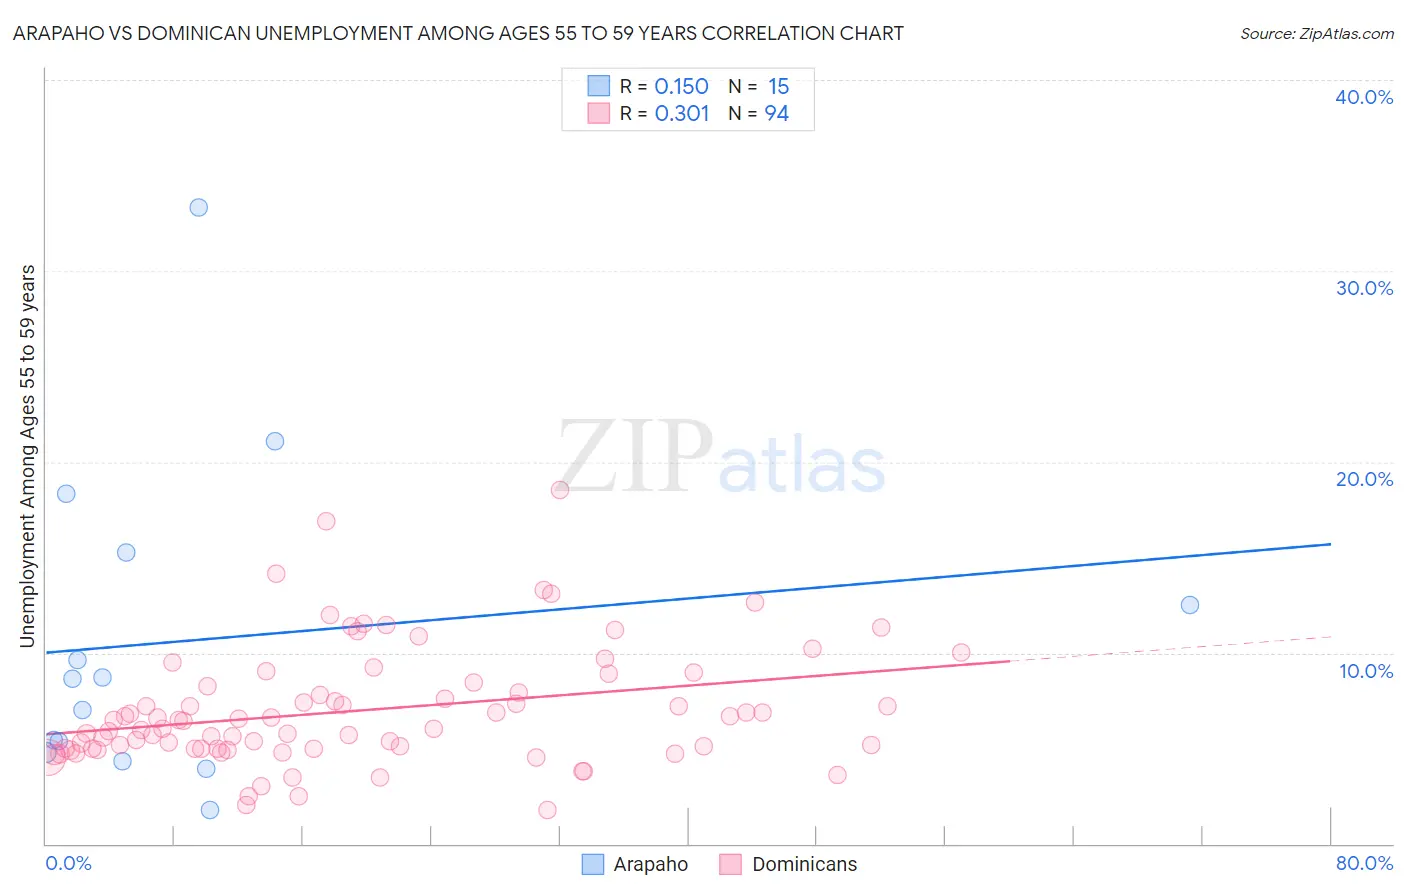 Arapaho vs Dominican Unemployment Among Ages 55 to 59 years